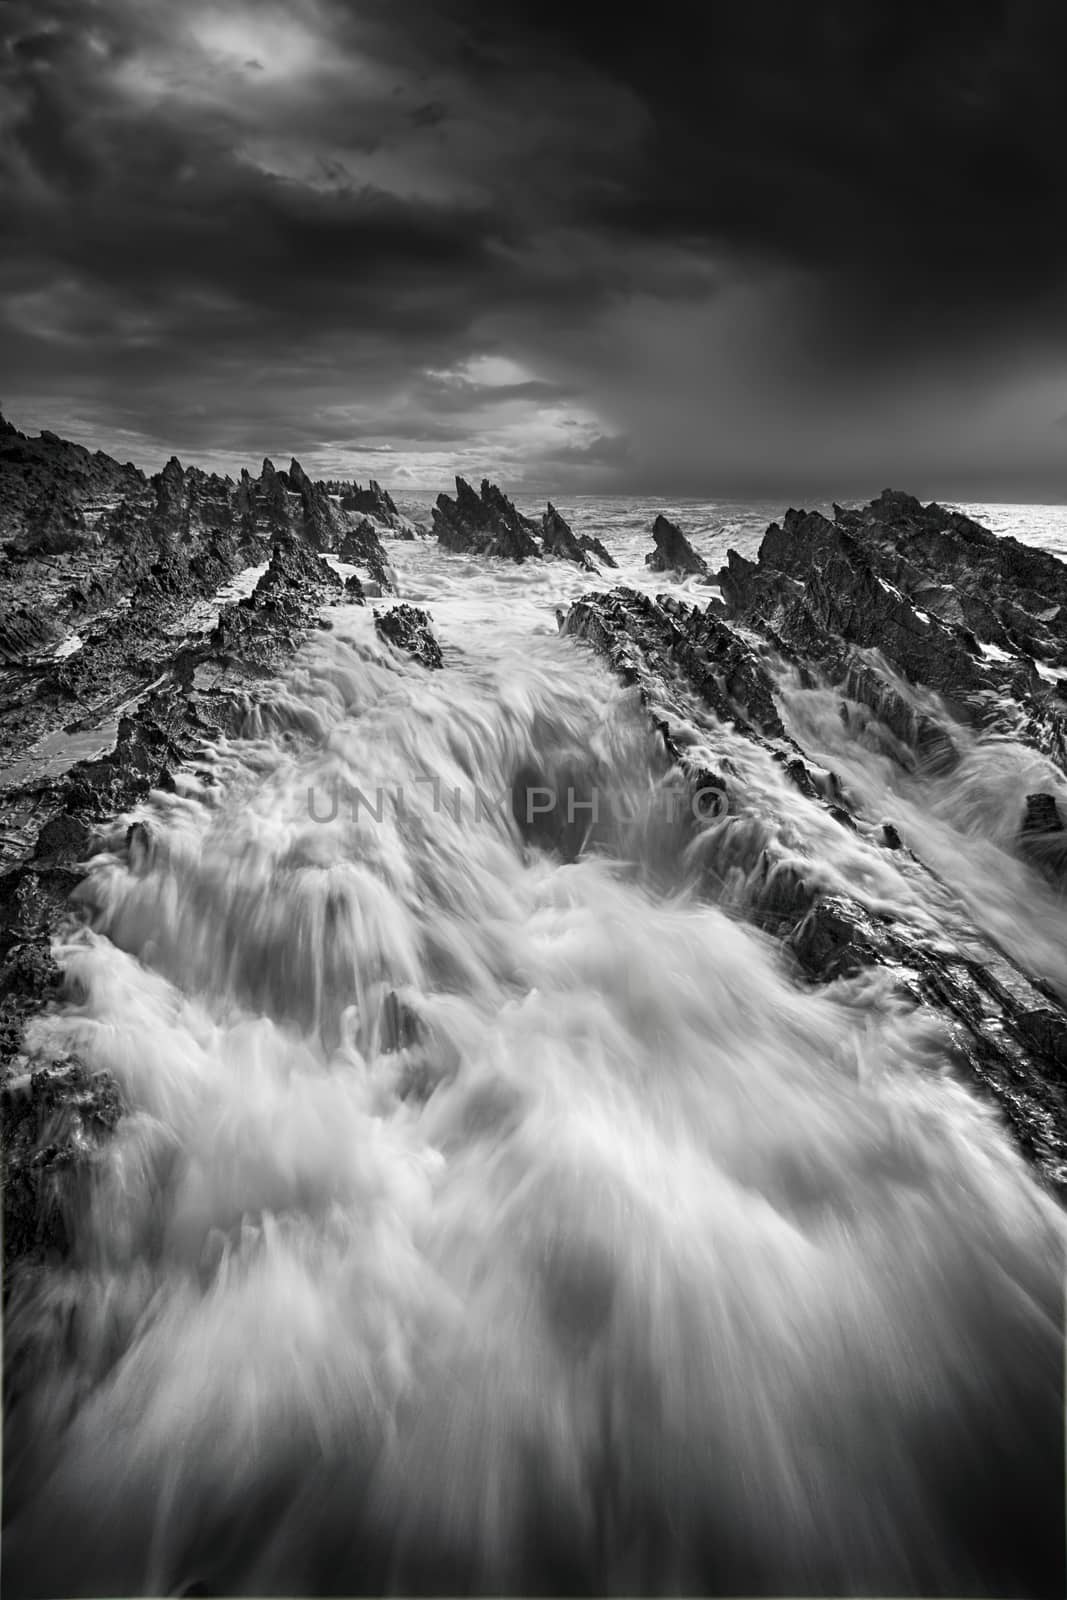 Storm approaching and rough seas with big flows over jagged deathly rocks